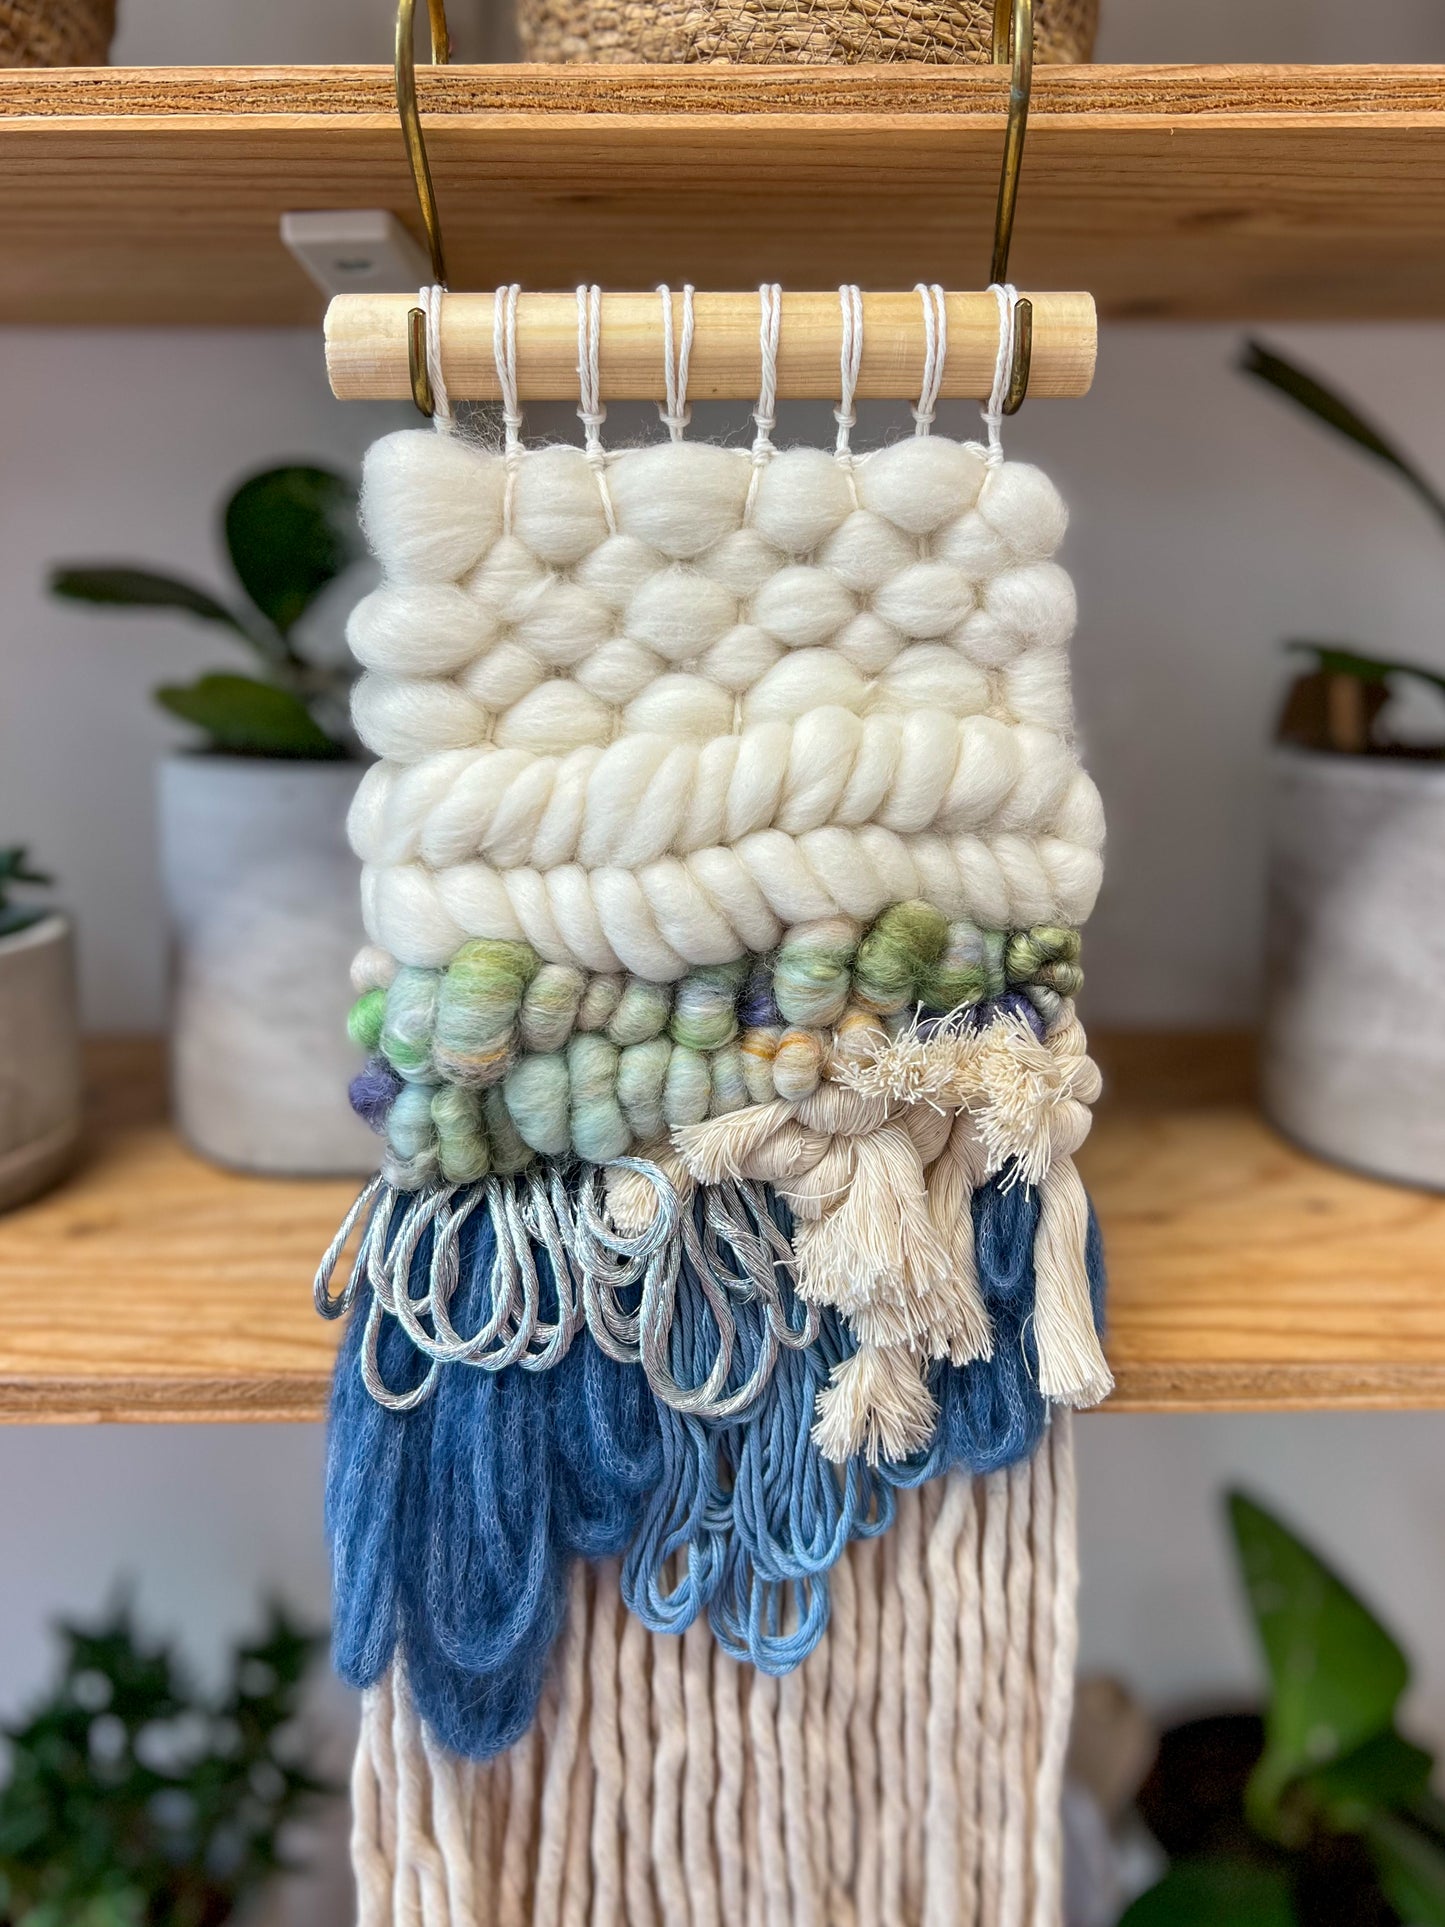 Woven Hanging 6